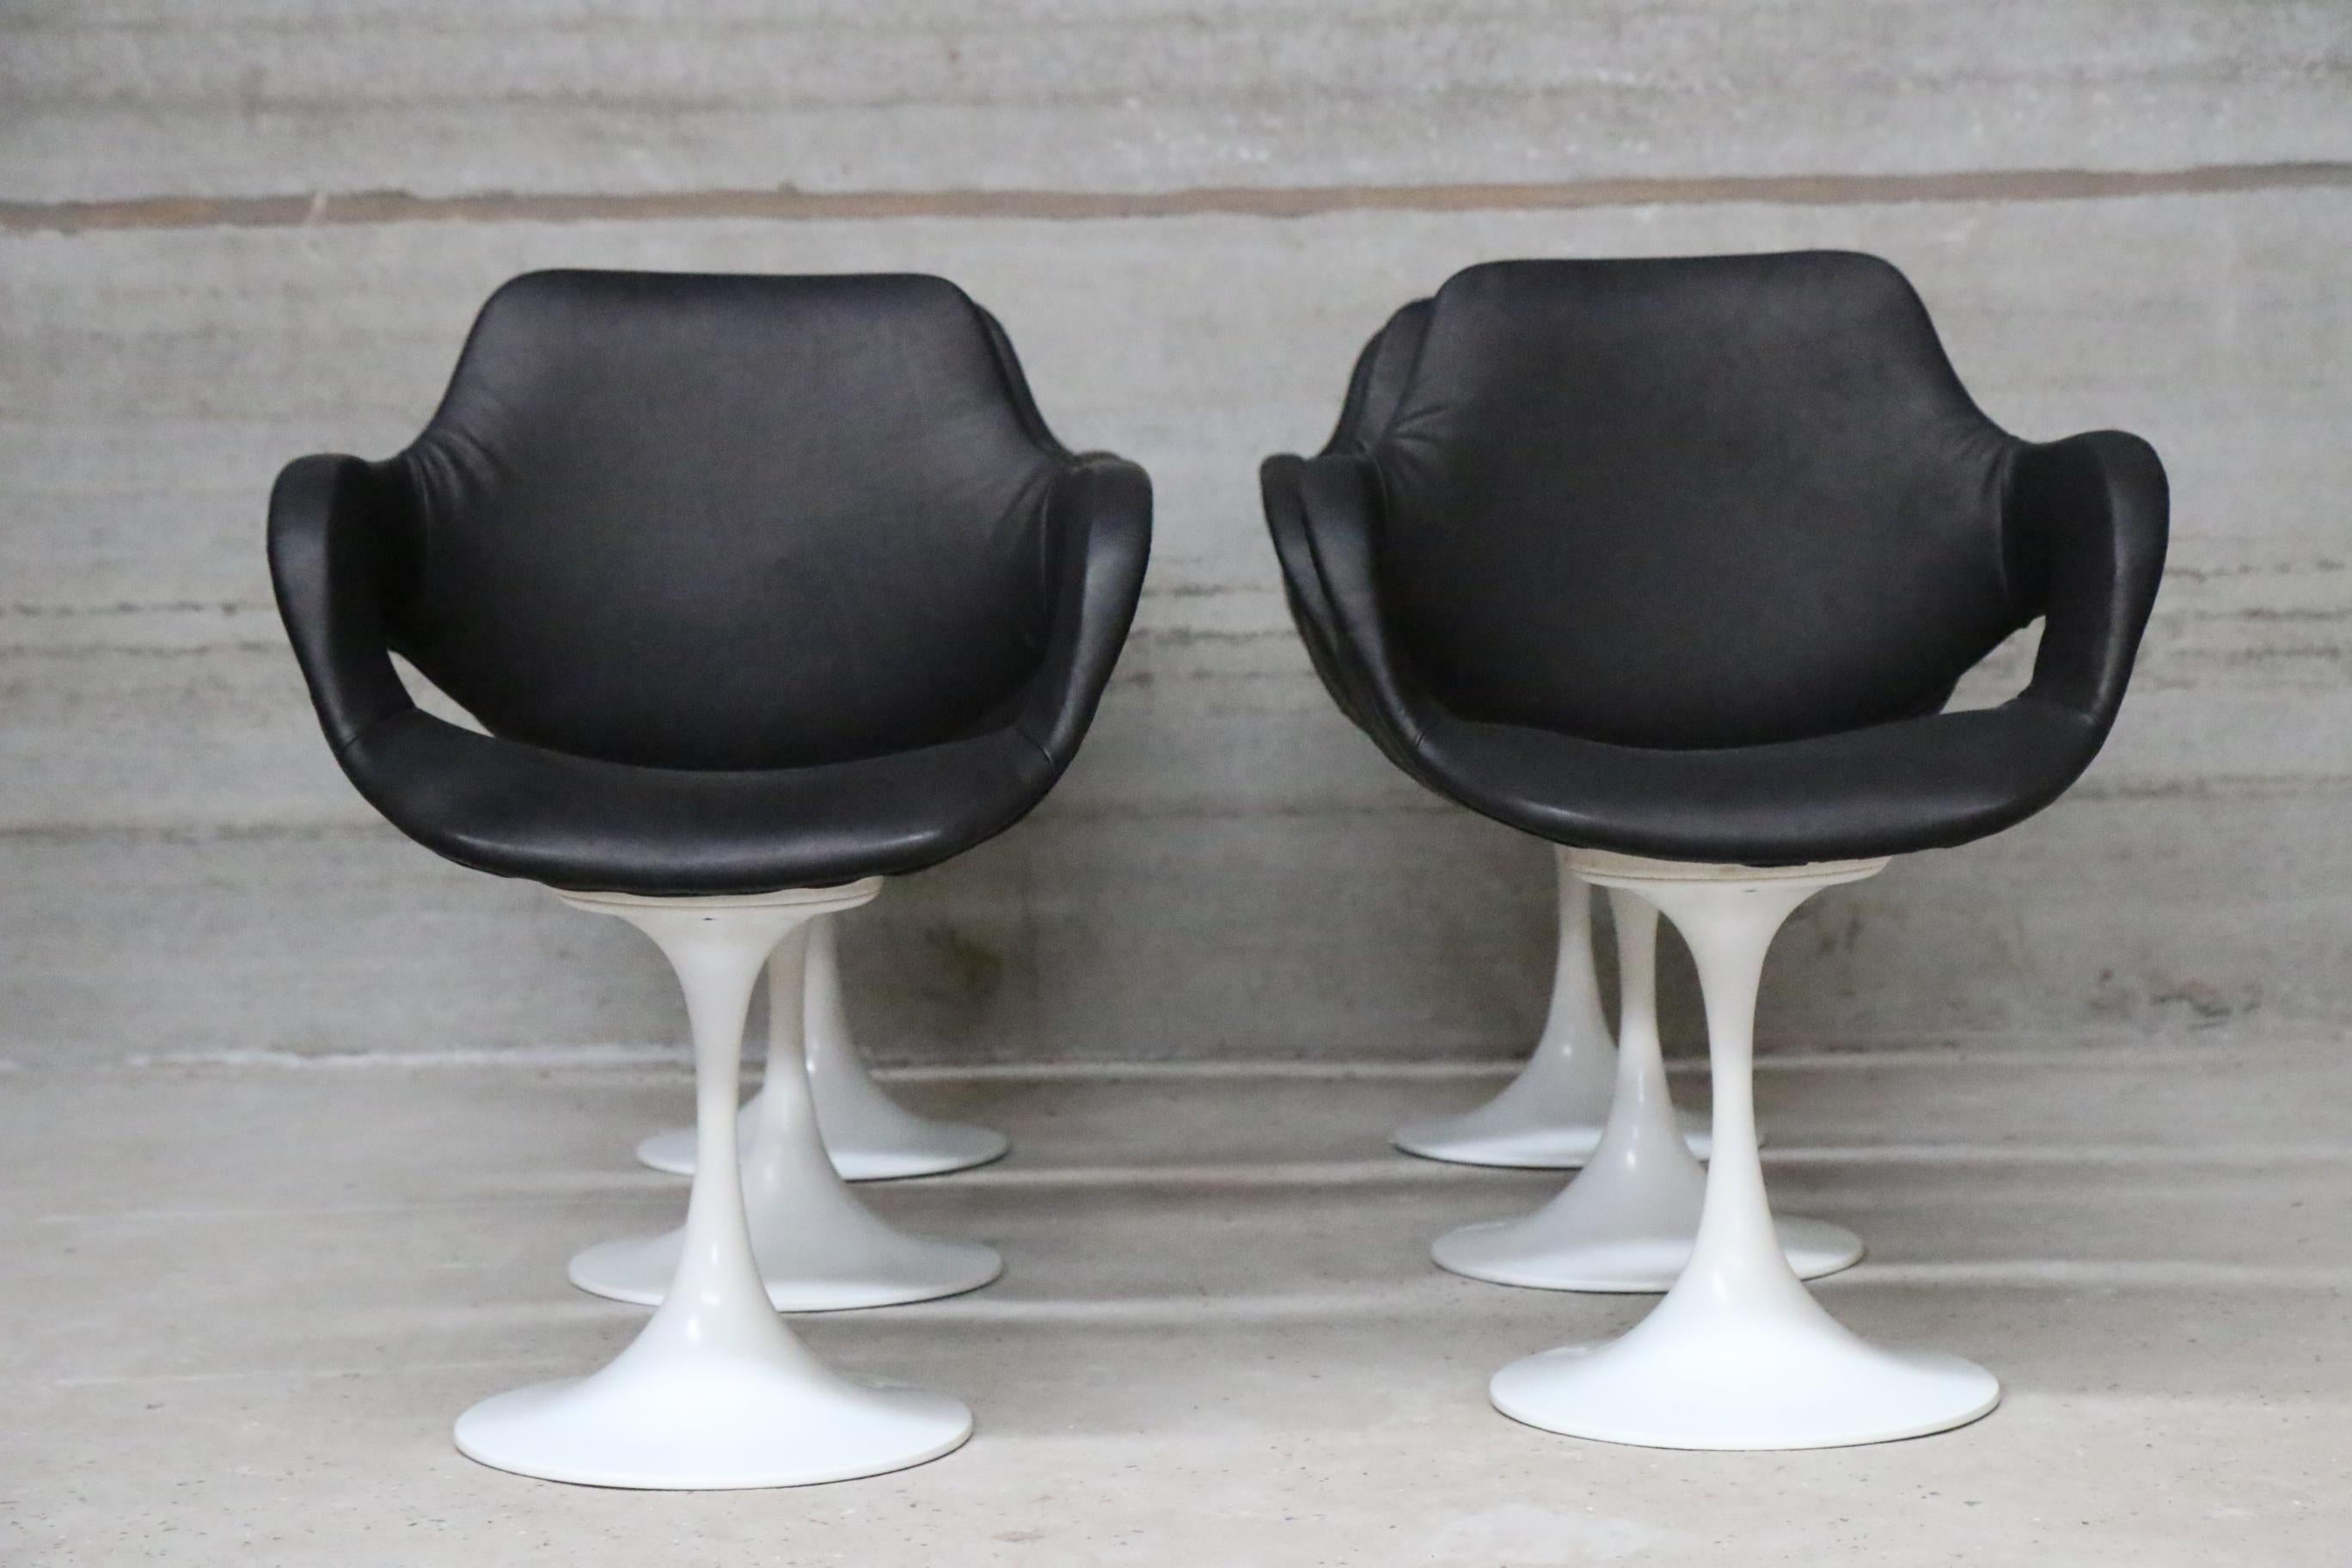 Steel 6 Boris Tabacoff Armchairs Re-Upholstered in Full Grain Black Leather For Sale